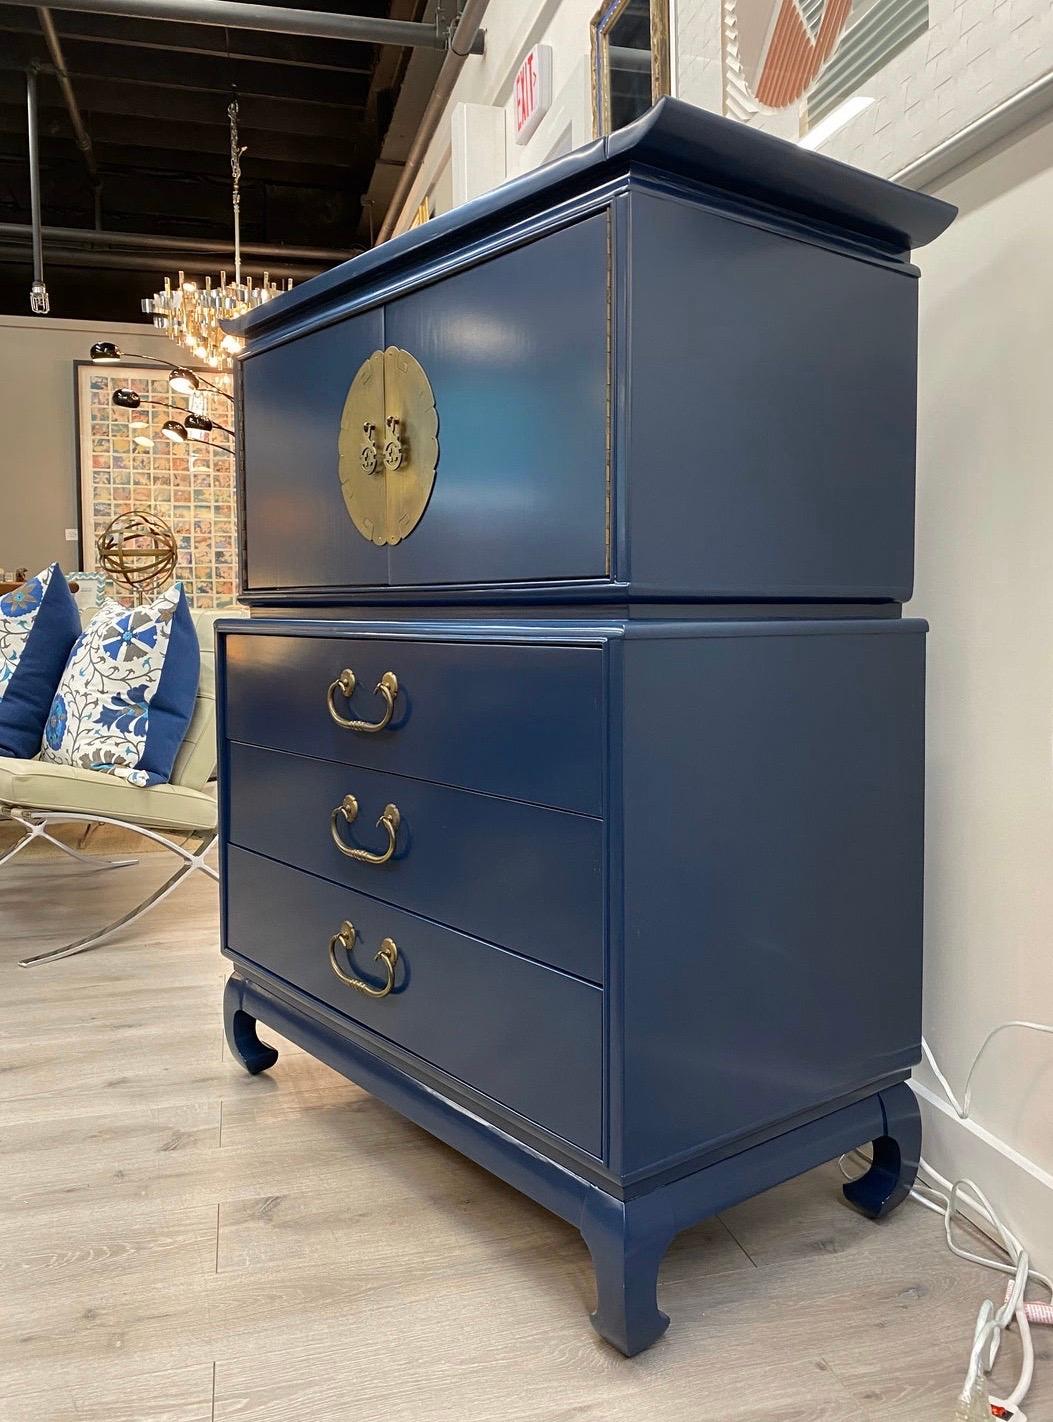 Newly lacquered in a most unusual shade of blue that is impossible to miss, the Mid-Century Modern
chinoiserie style chest is guaranteed to impress. Multiple drawers for all your storage needs. Original brass hardware. Great lines and better scale.